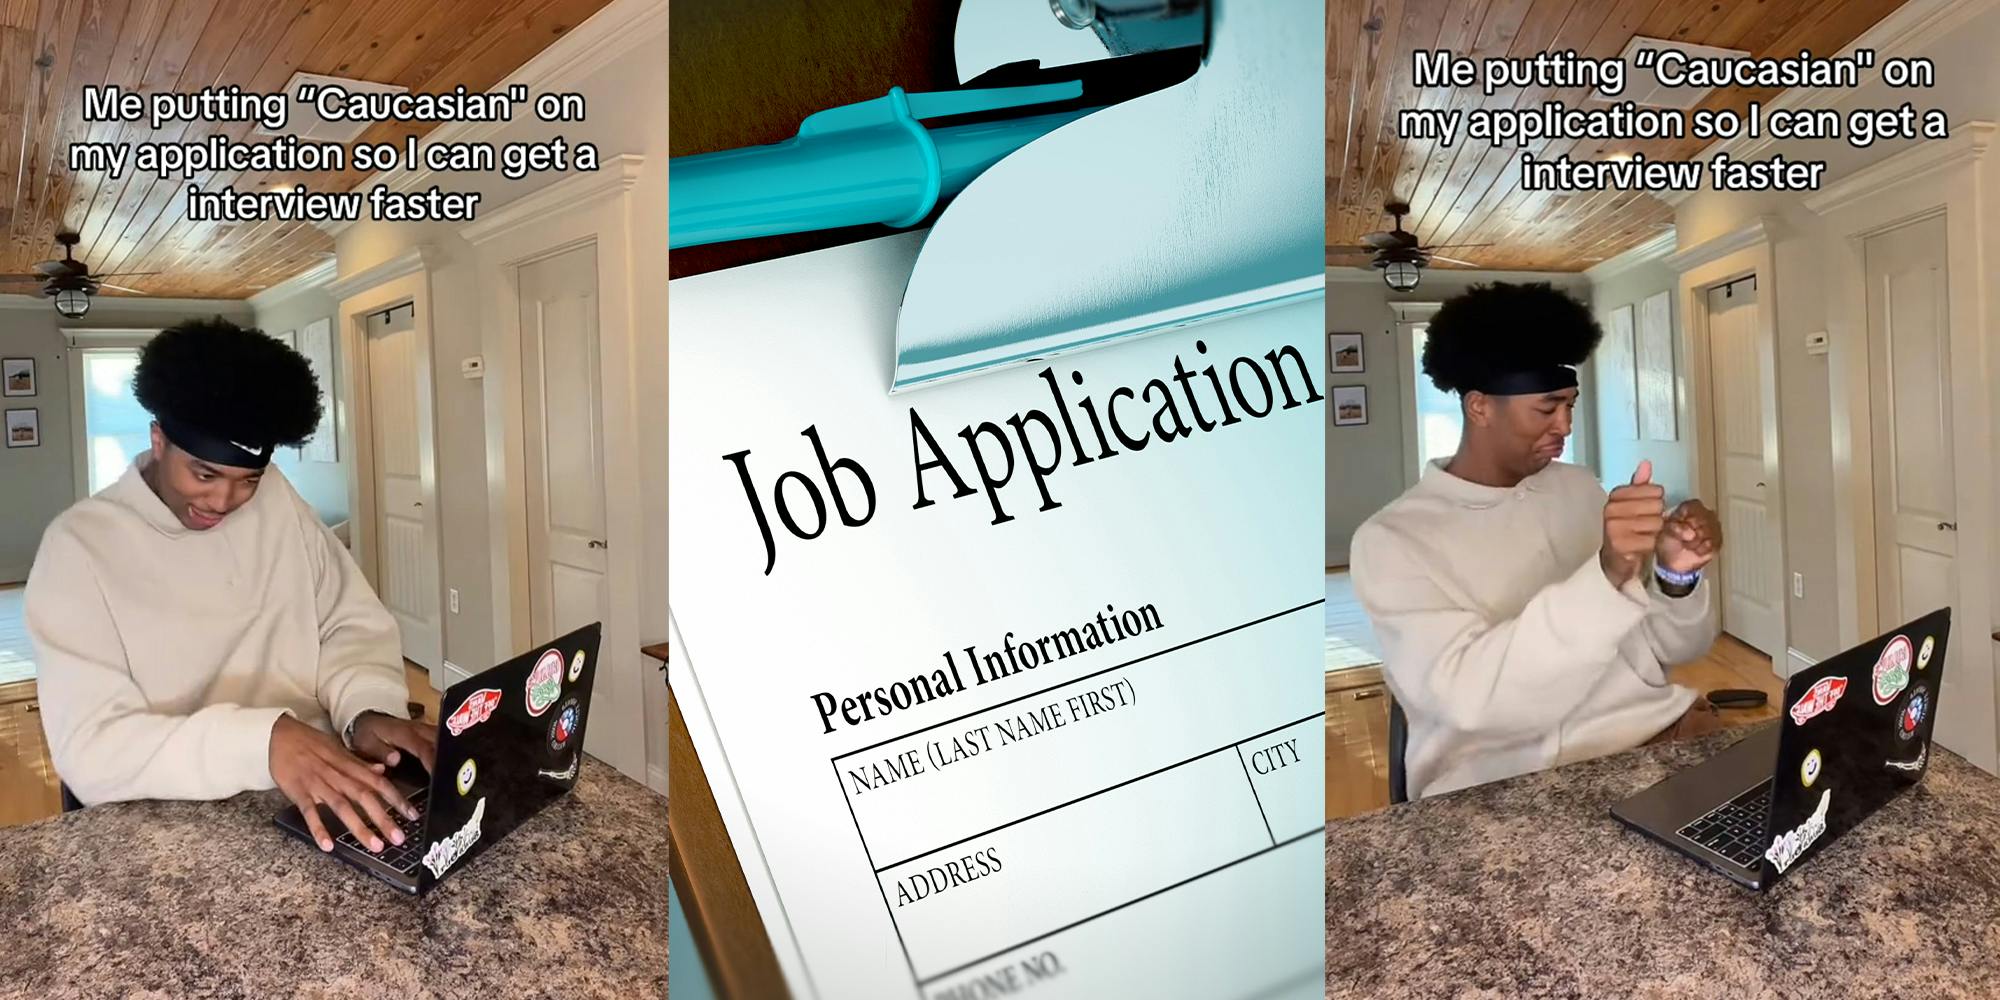 Black jobseeker says he puts ‘Caucasian’ on applications to get interviews faster